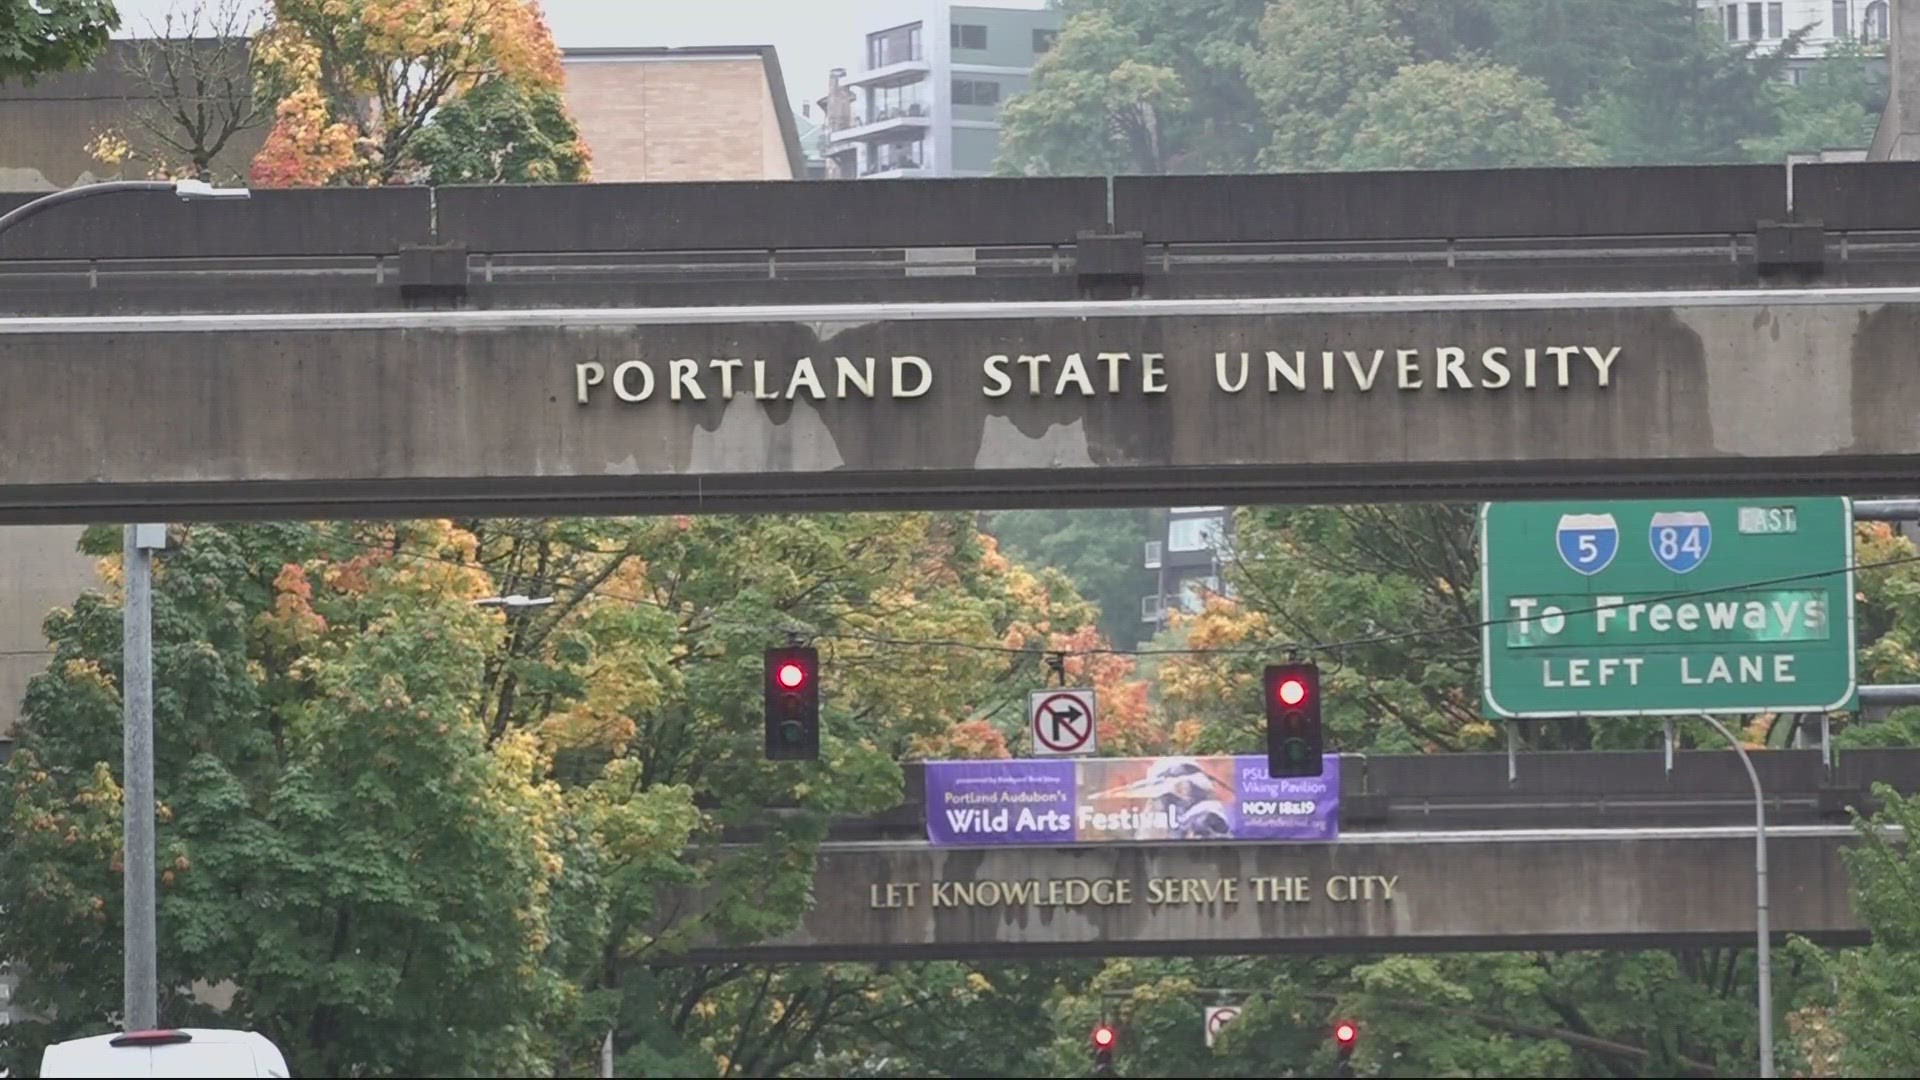 PSU is hoping their ‘bold’ plans can help boost the sector, benefiting the state and country.